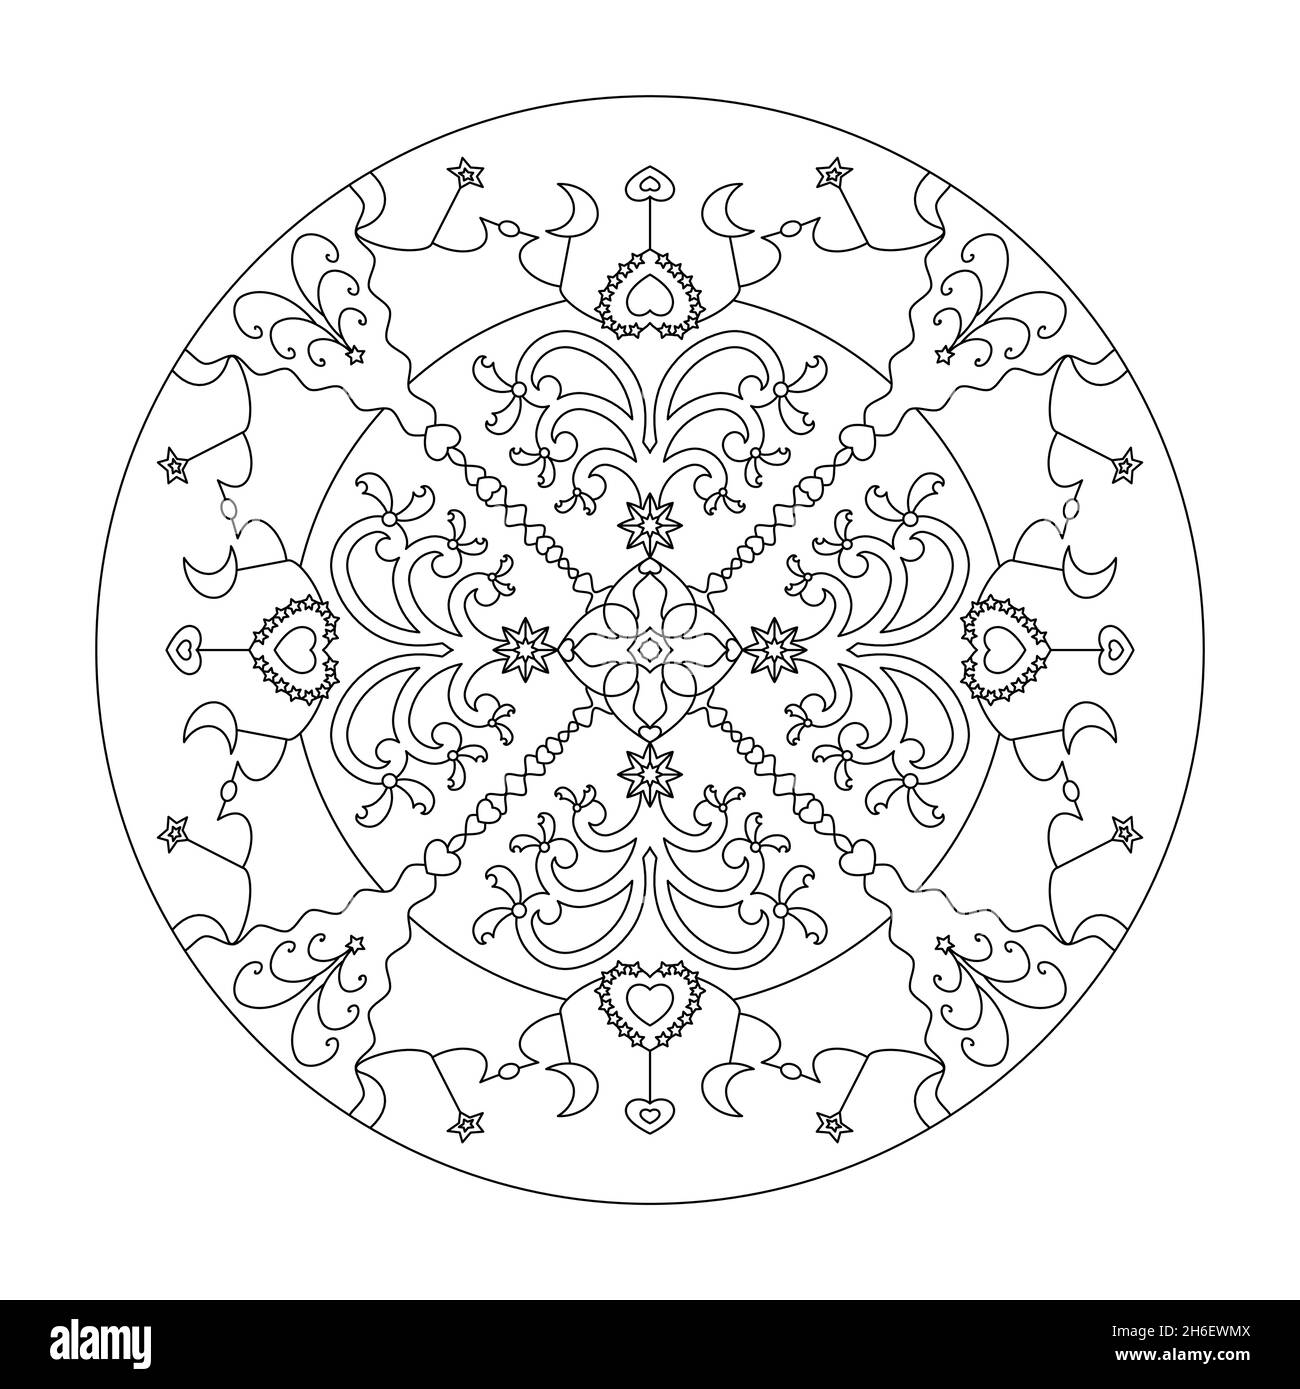 Christmas mandala. Christmas coloring page. Fancy christmas tree and little hearts. Vector illustration. Stock Vector